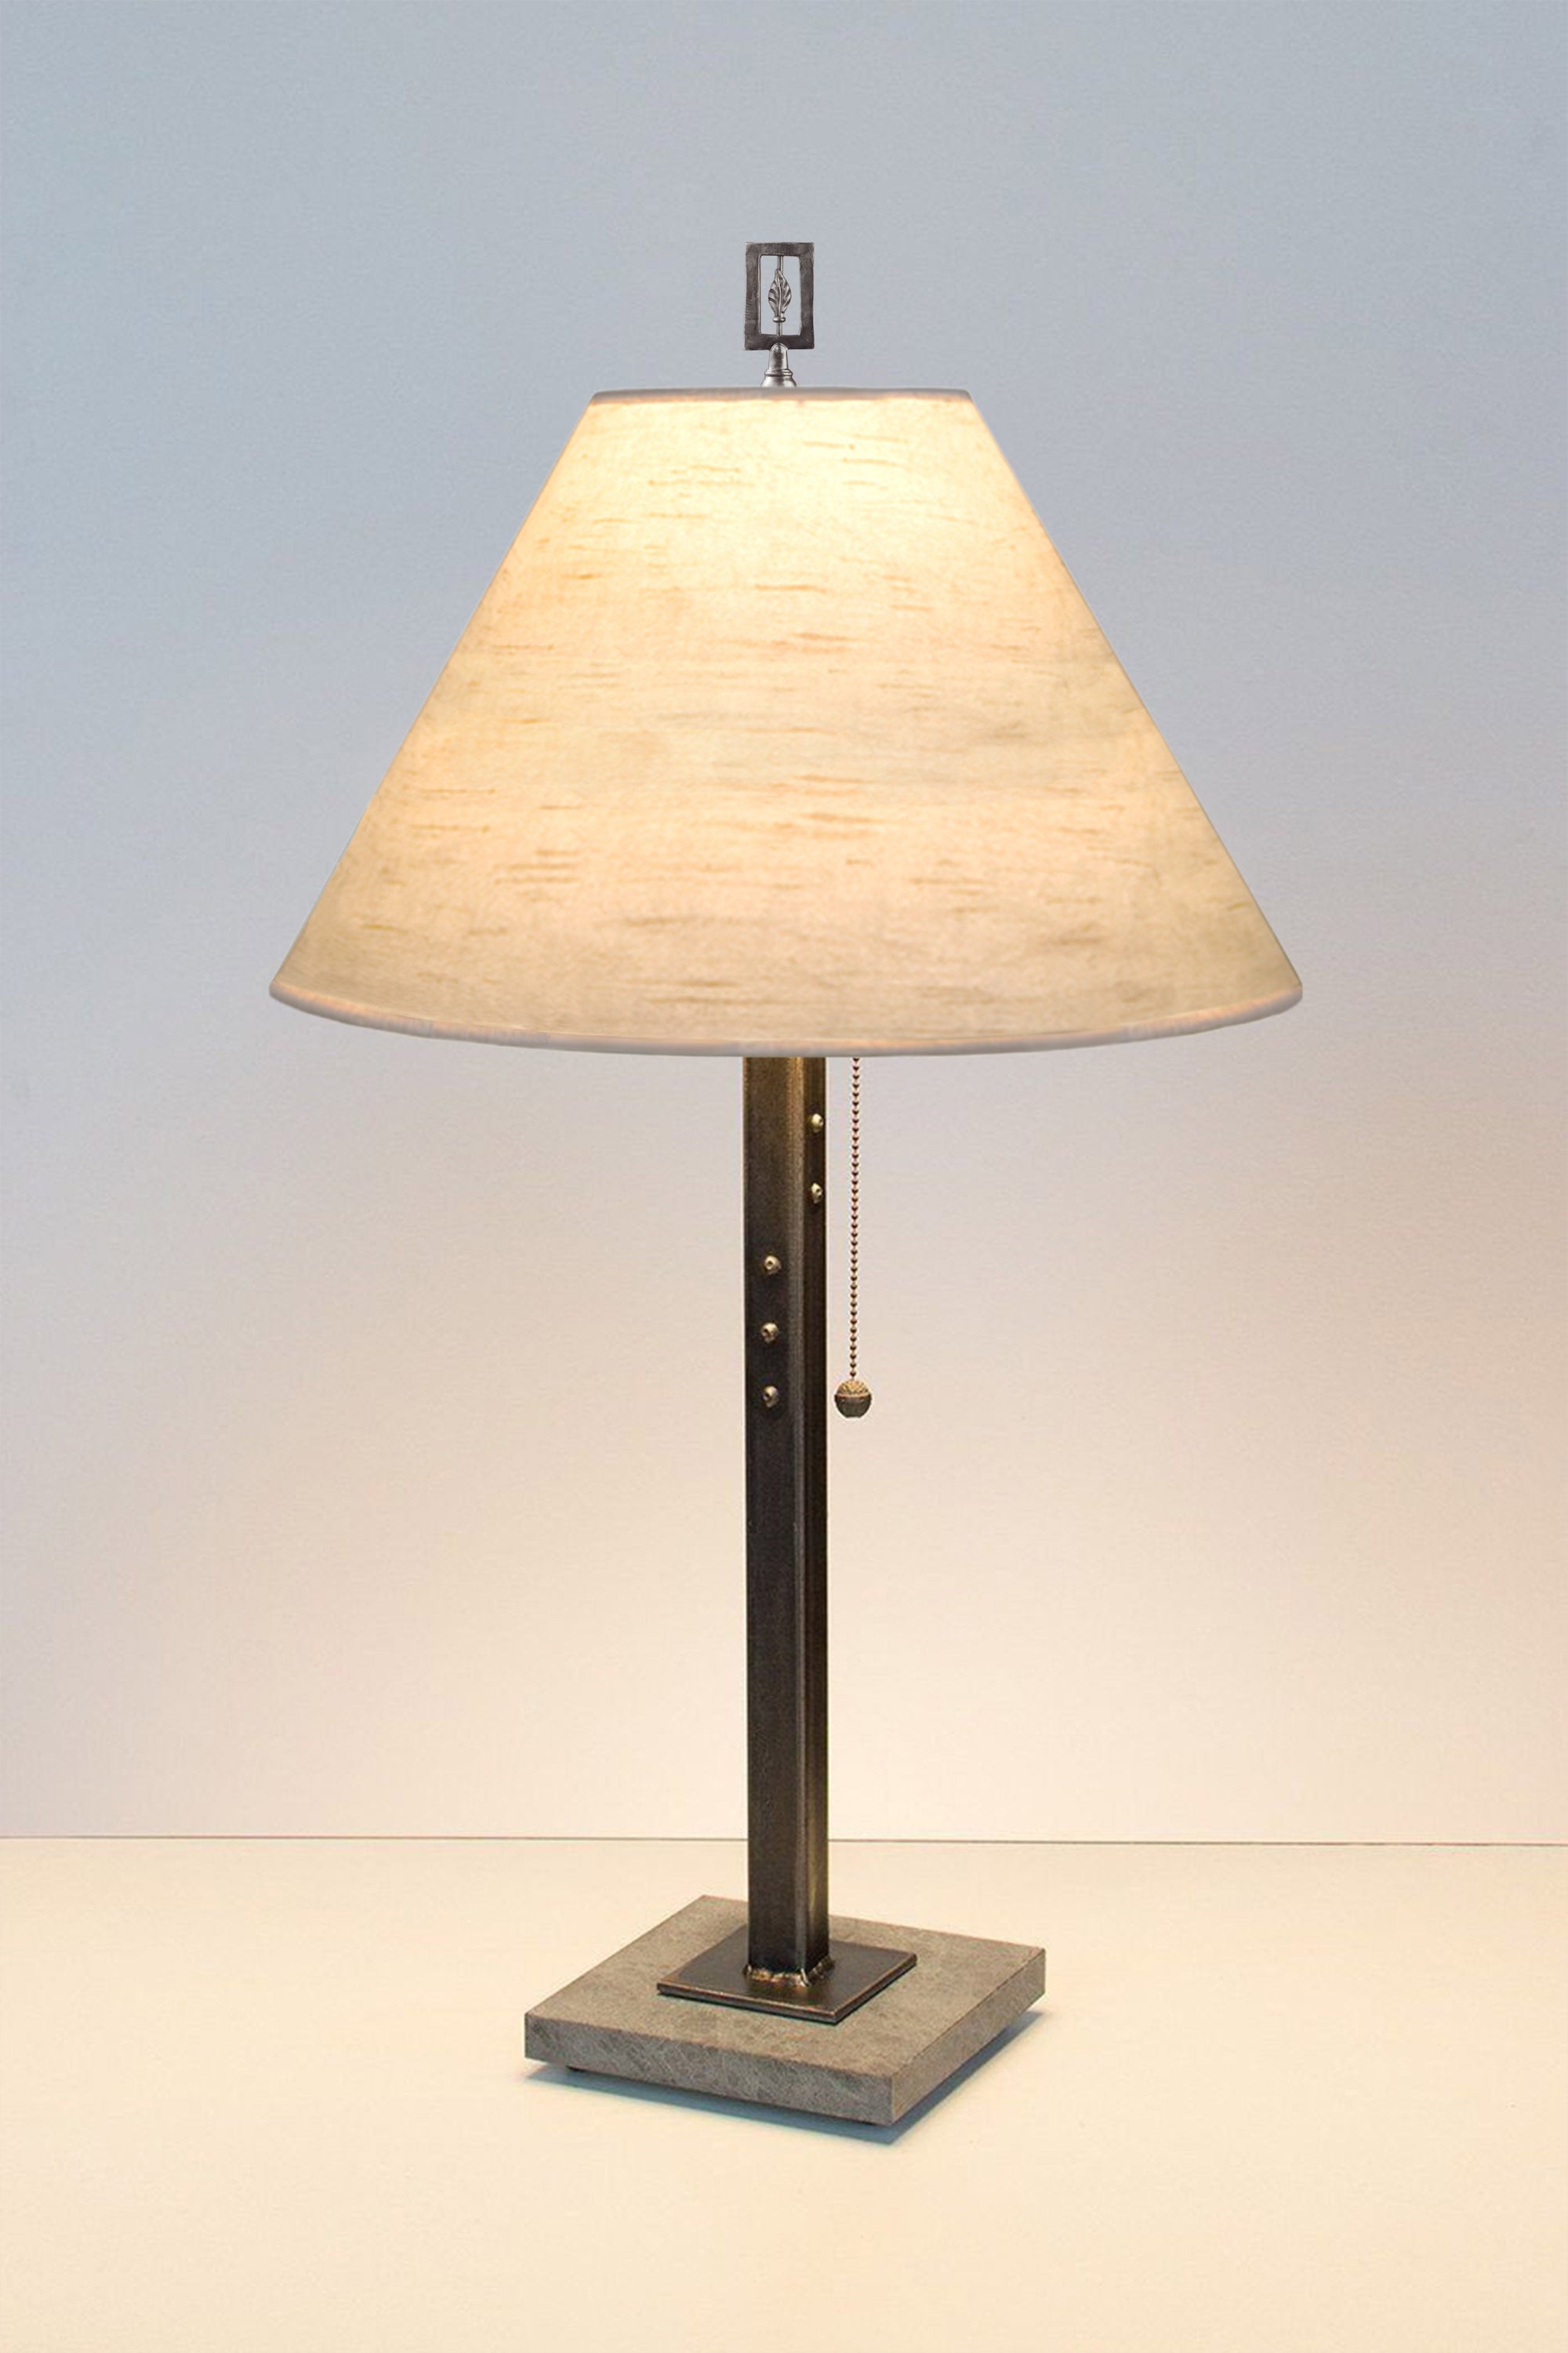 Janna Ugone & Co Table Lamps Steel Table Lamp with Medium Conical Shade in Simply Birch